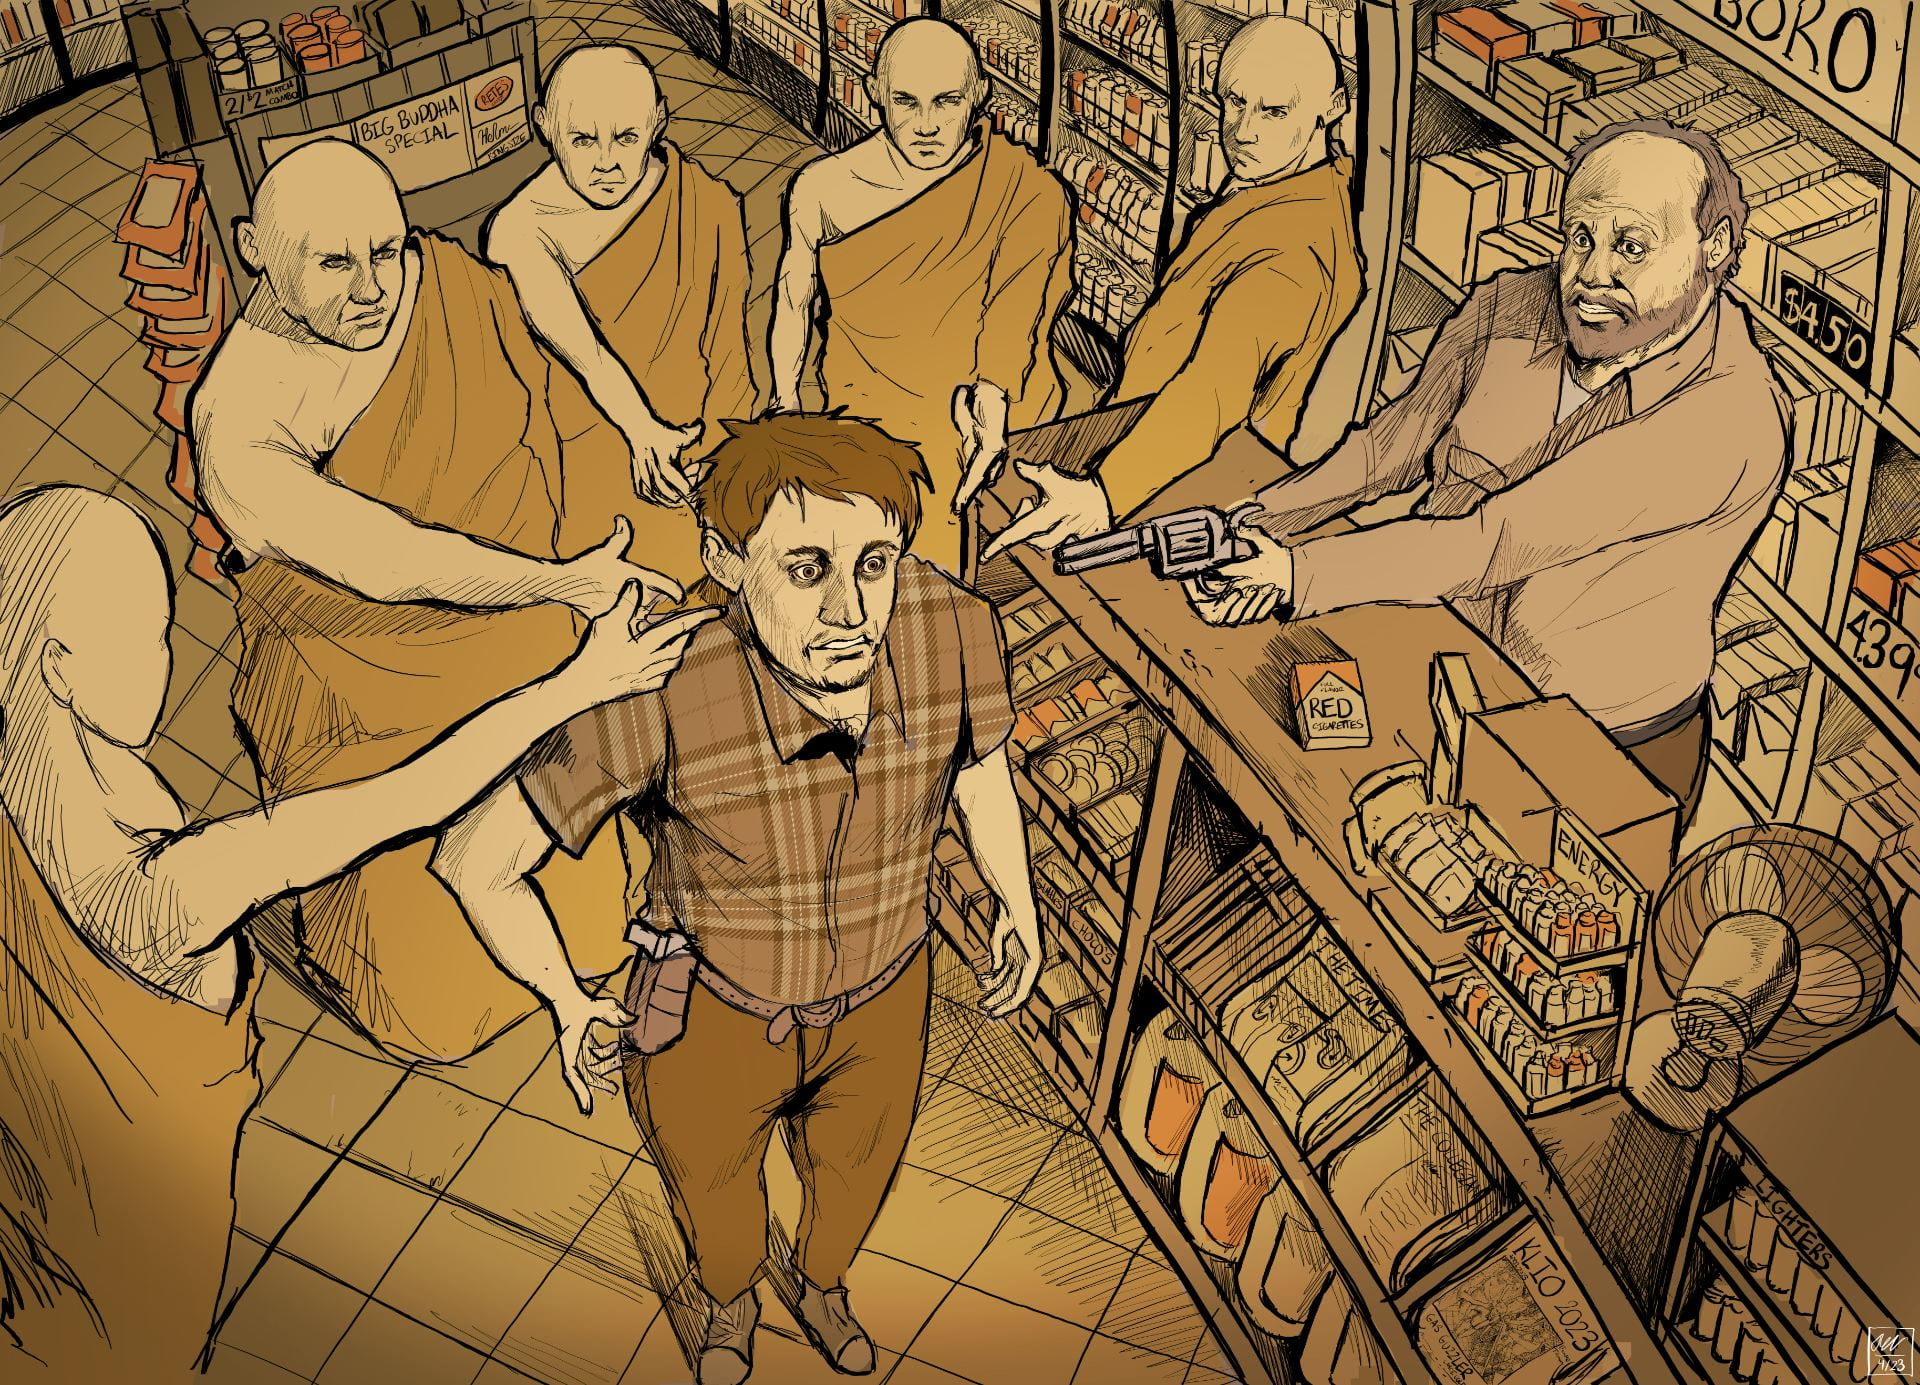 Illustration of man being held at gunpoint by several garbed Buddhist men in a gas station.